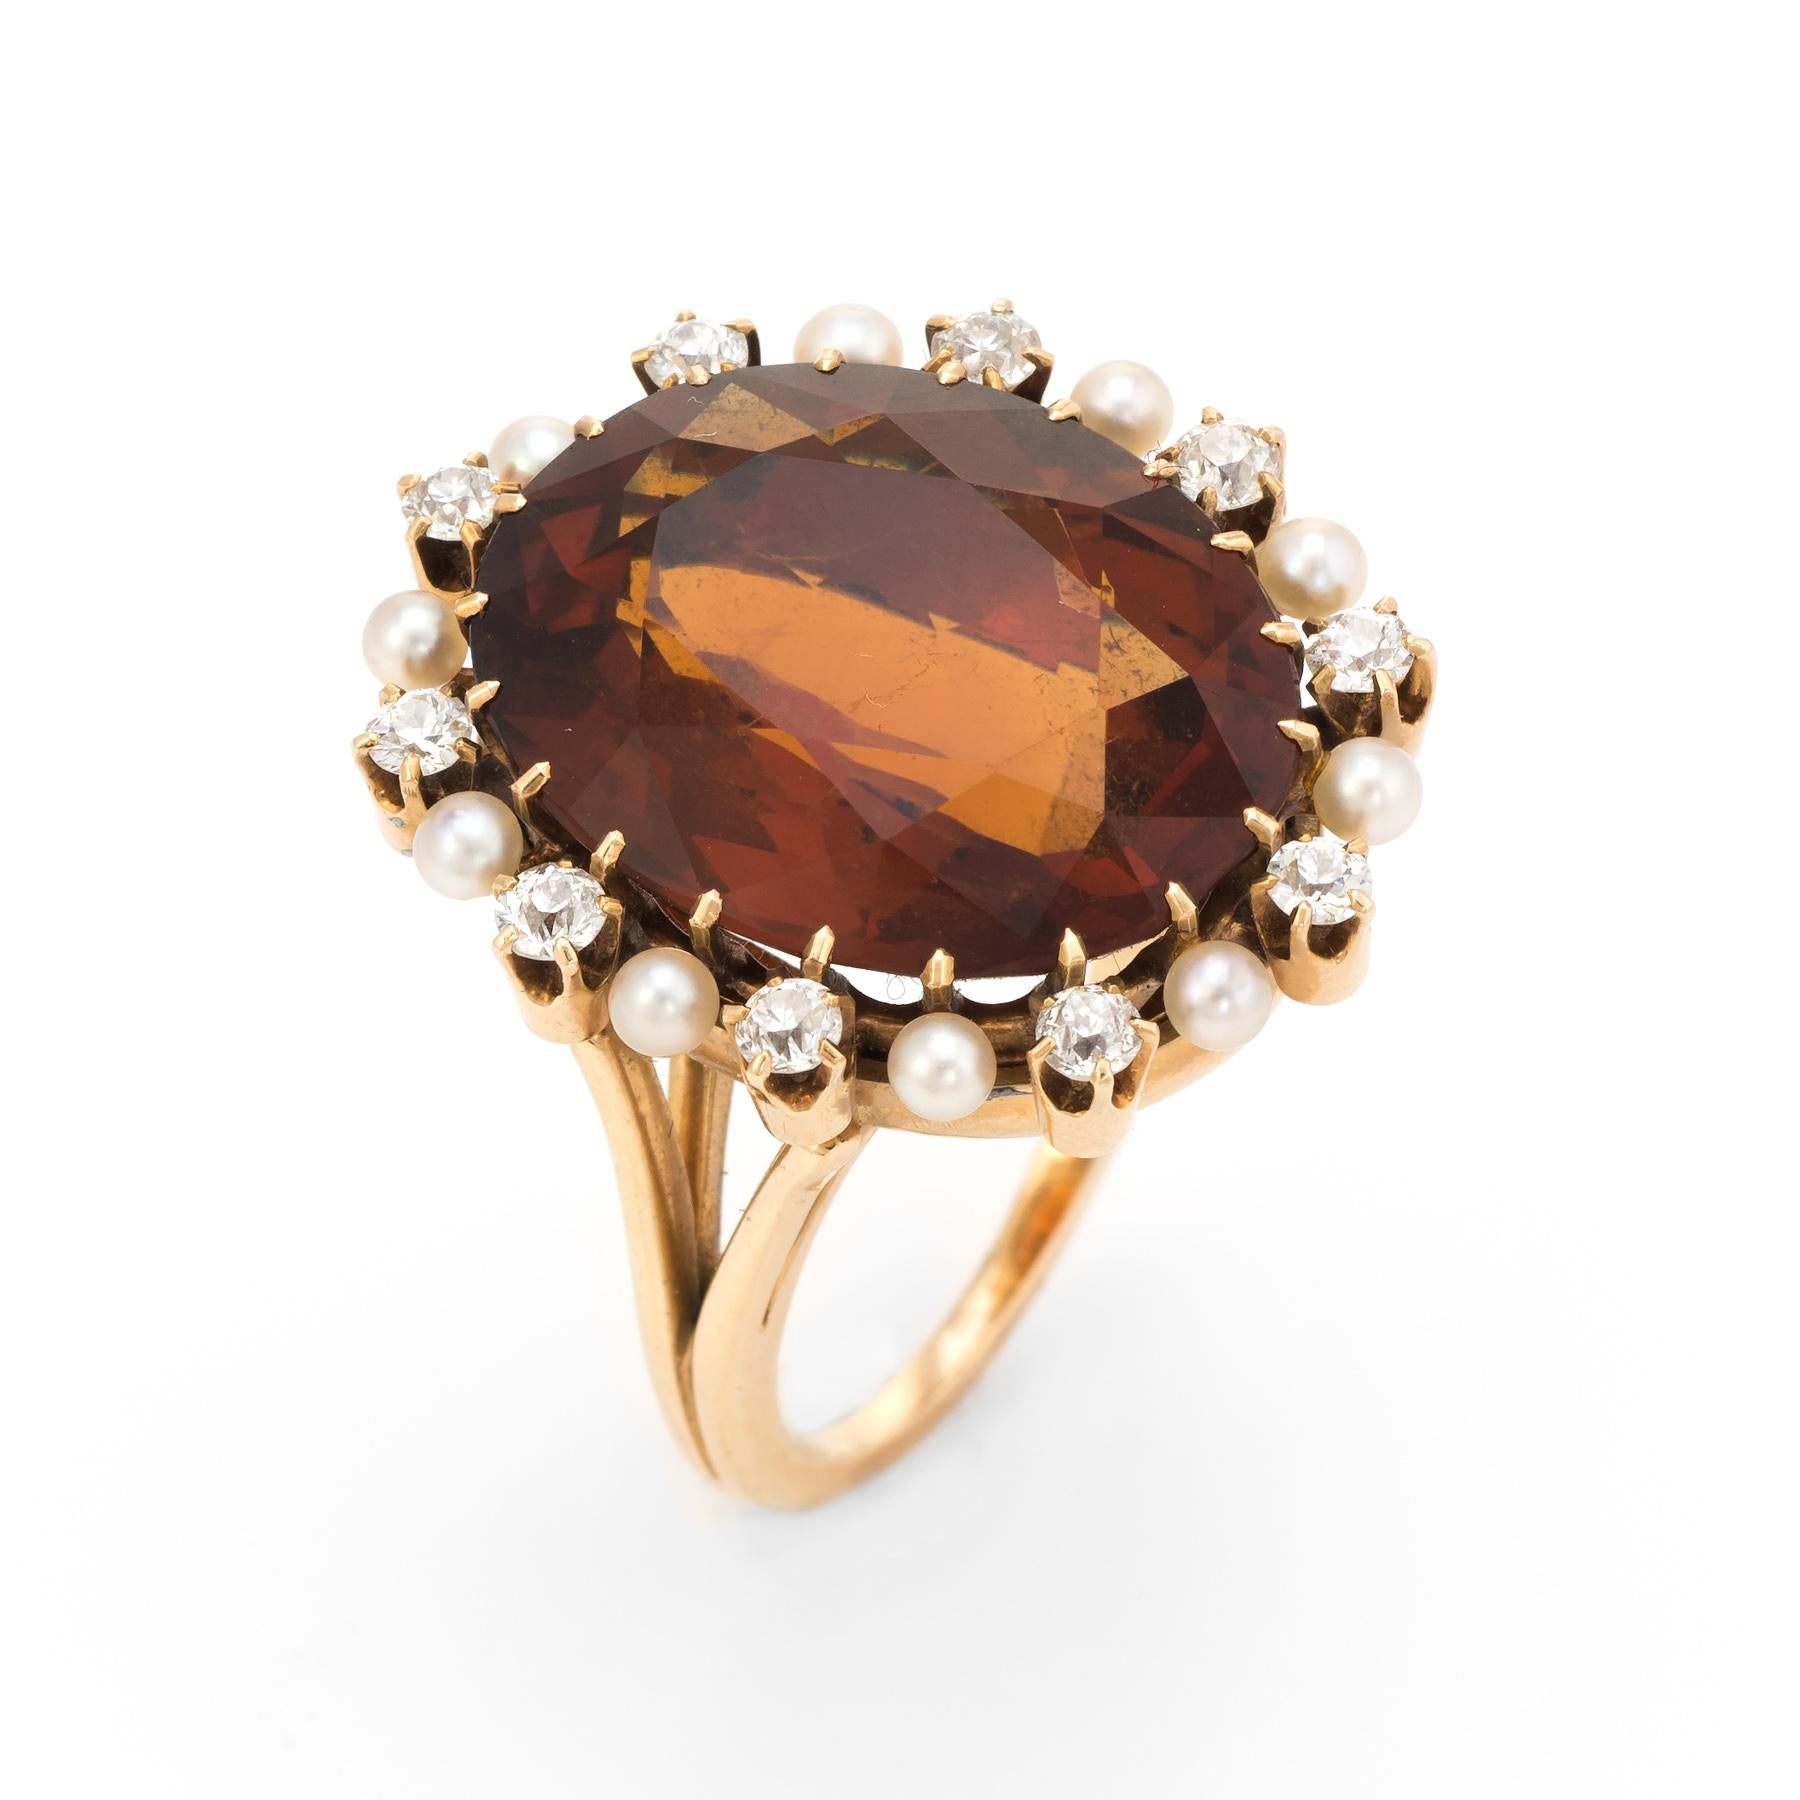 Finely detailed vintage large oval cocktail ring (circa 1940s to 1950s), crafted in 14 karat yellow gold. 

Centrally mounted faceted oval madeira citrine measures 20mm x 16mm (estimated at 20 carats), accented with 10 approx. 0.04 carat old mine